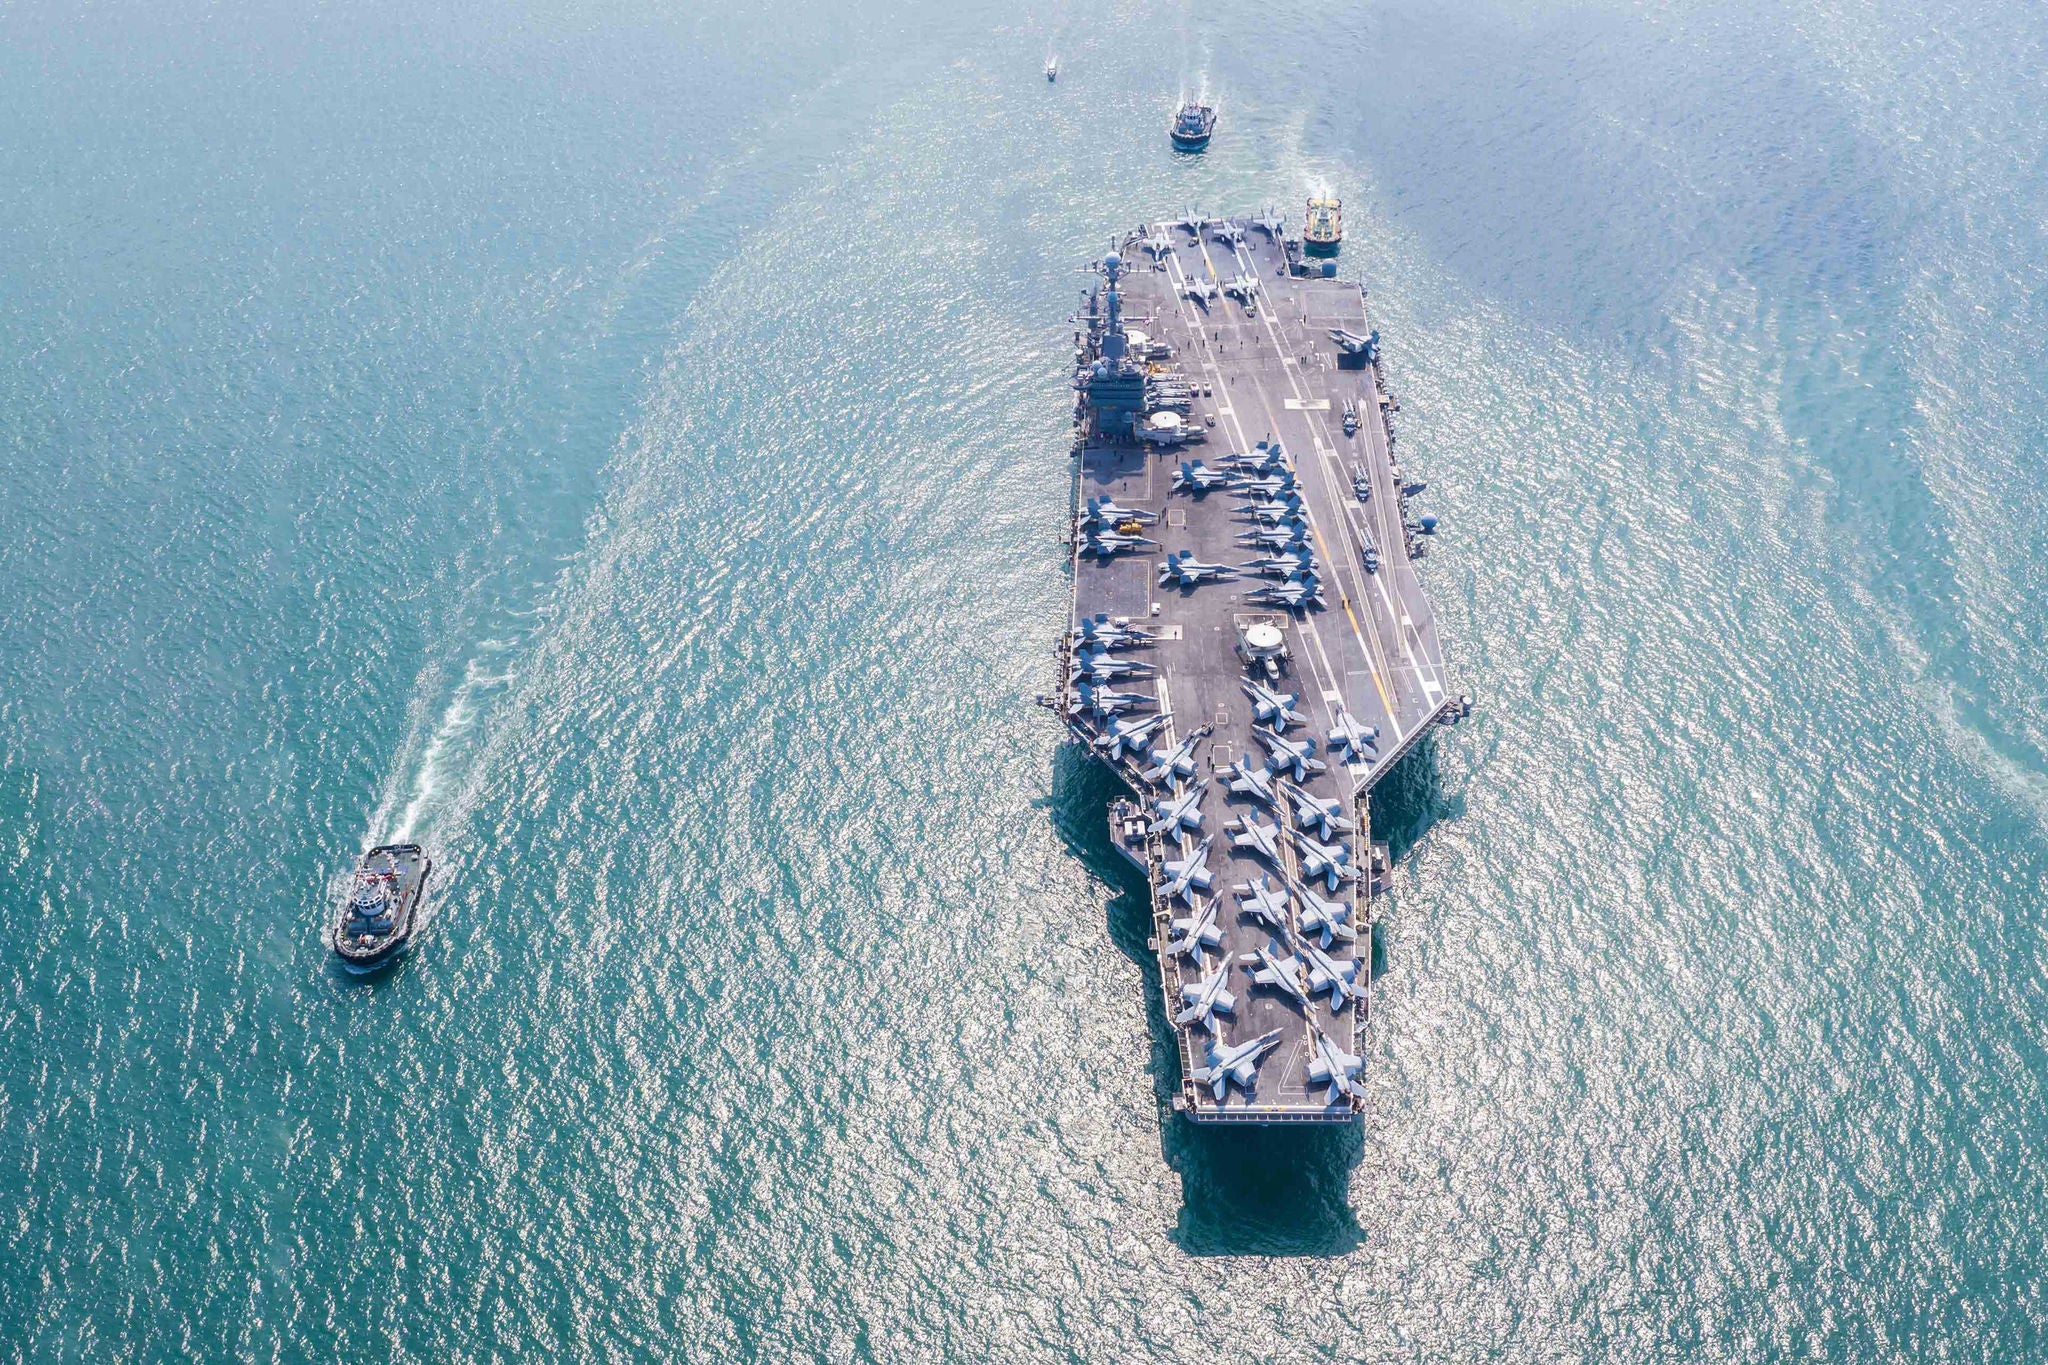 Navy Nuclear Aircraft carrier, Military navy ship carrier full loading fighter jet aircraft, Aerial view.